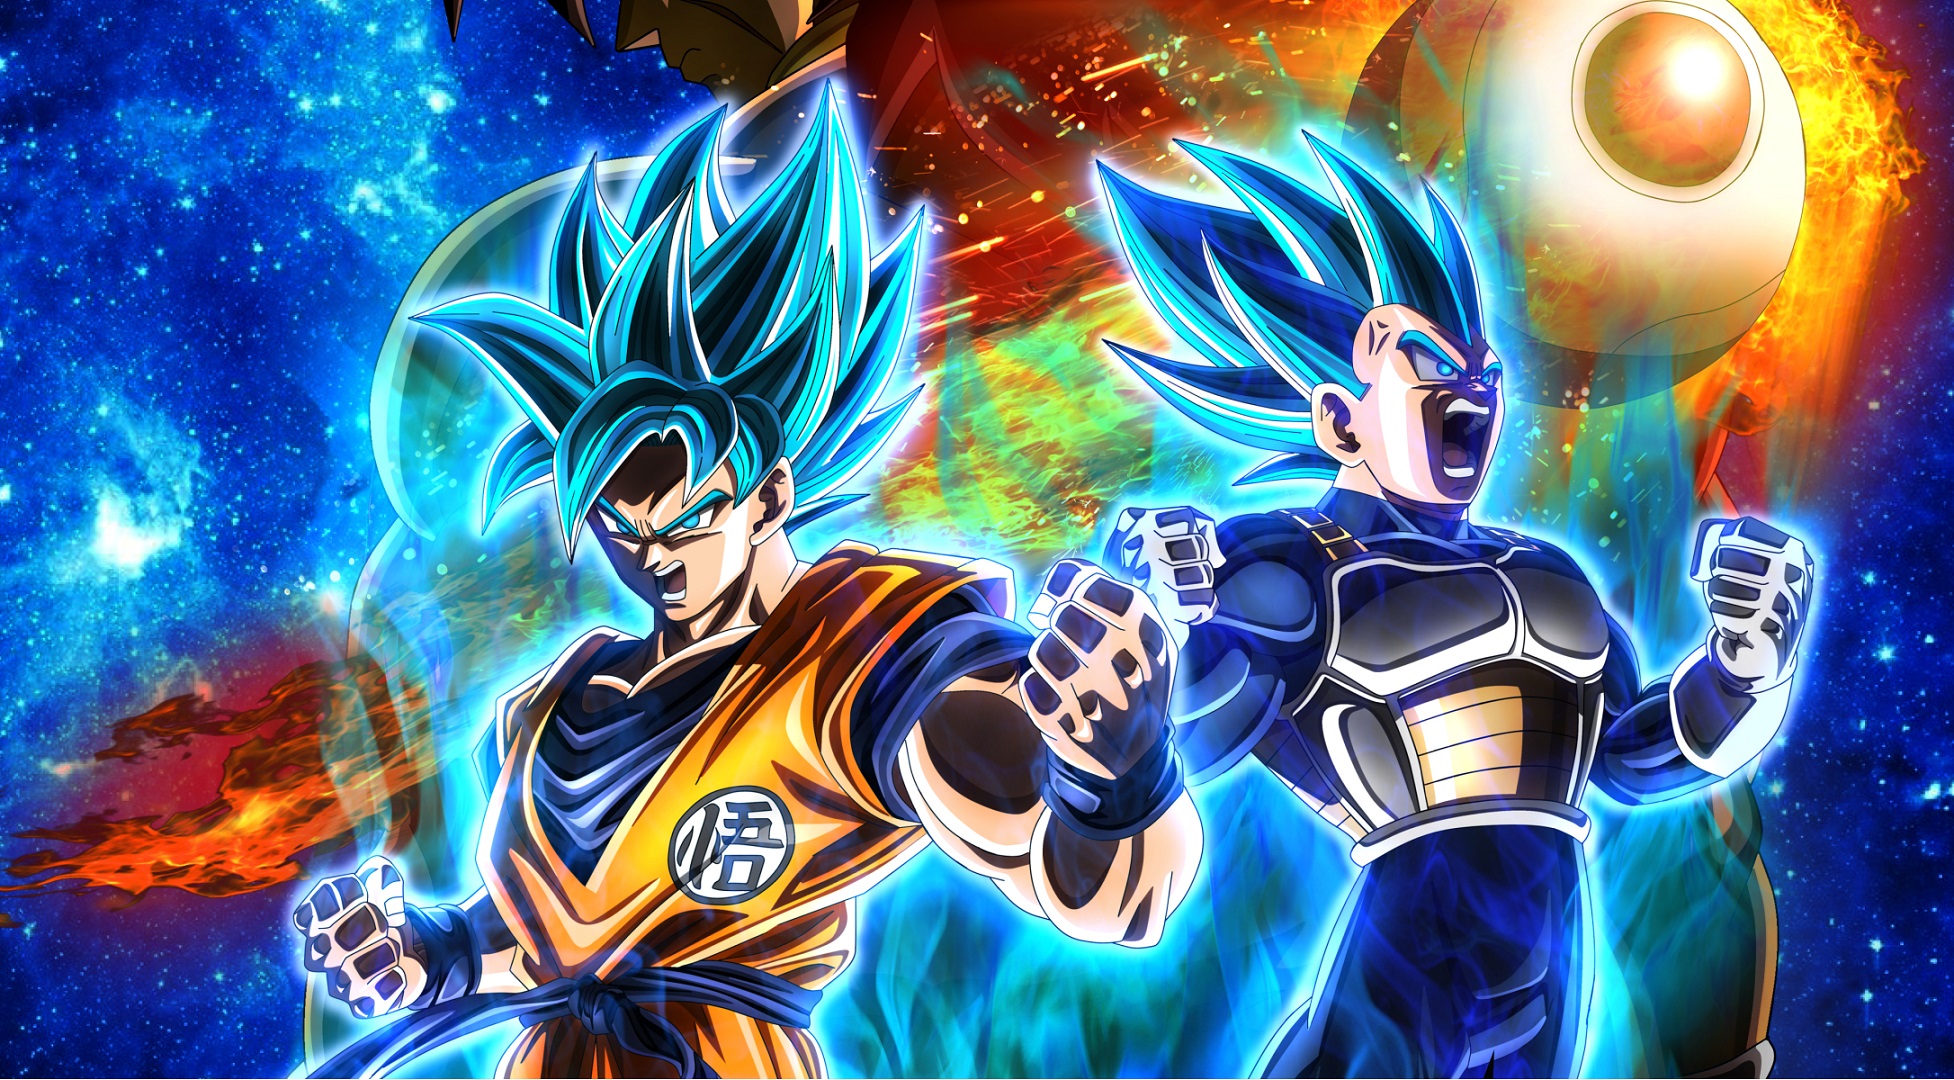 Dragon Ball Super: Broly Review